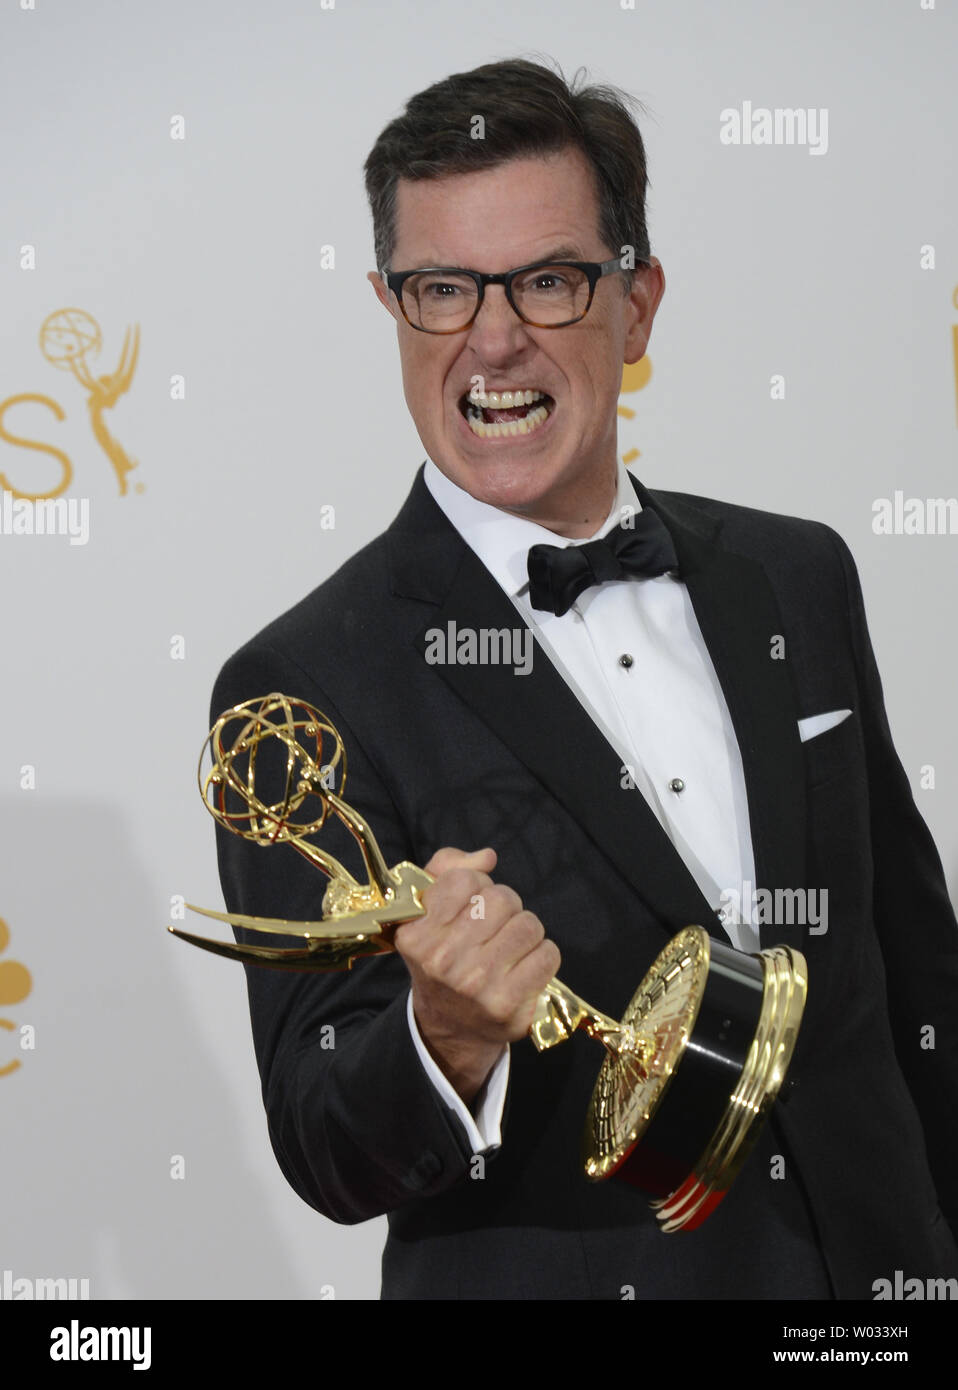 Stephen Colbert holds his Emmy for Outstanding Variety Series for 'The Colbert Report', at the Primetime Emmy Awards at the Nokia Theatre in Los Angeles on August 25, 2014.     UPI/Phil McCarten Stock Photo